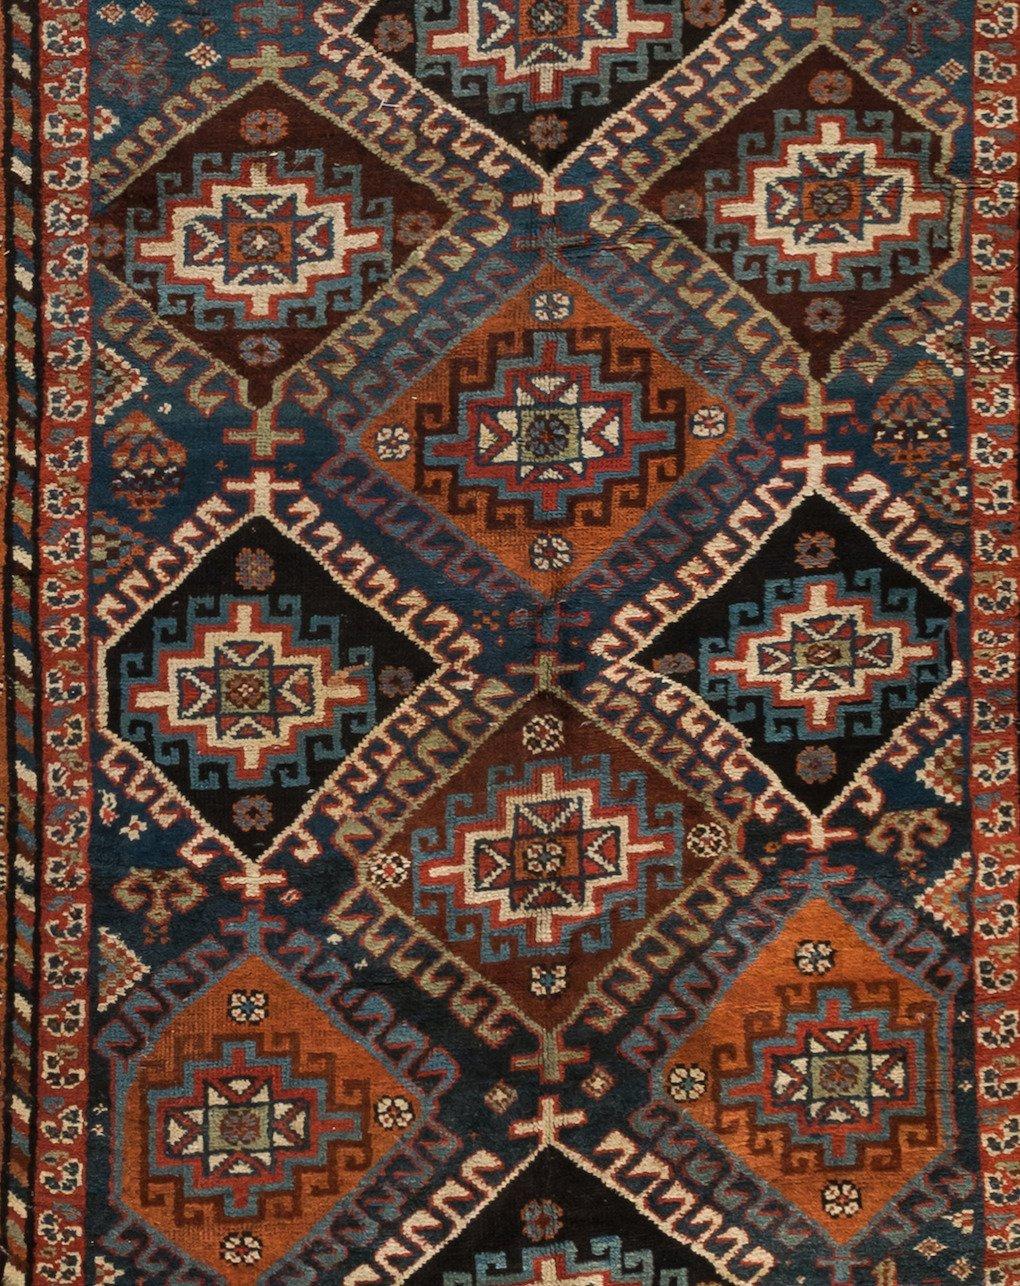 This lovely antique Persian Kurdish green carpet measures: 4.11 x 9.6 ft. and is from 1920s-1930s.